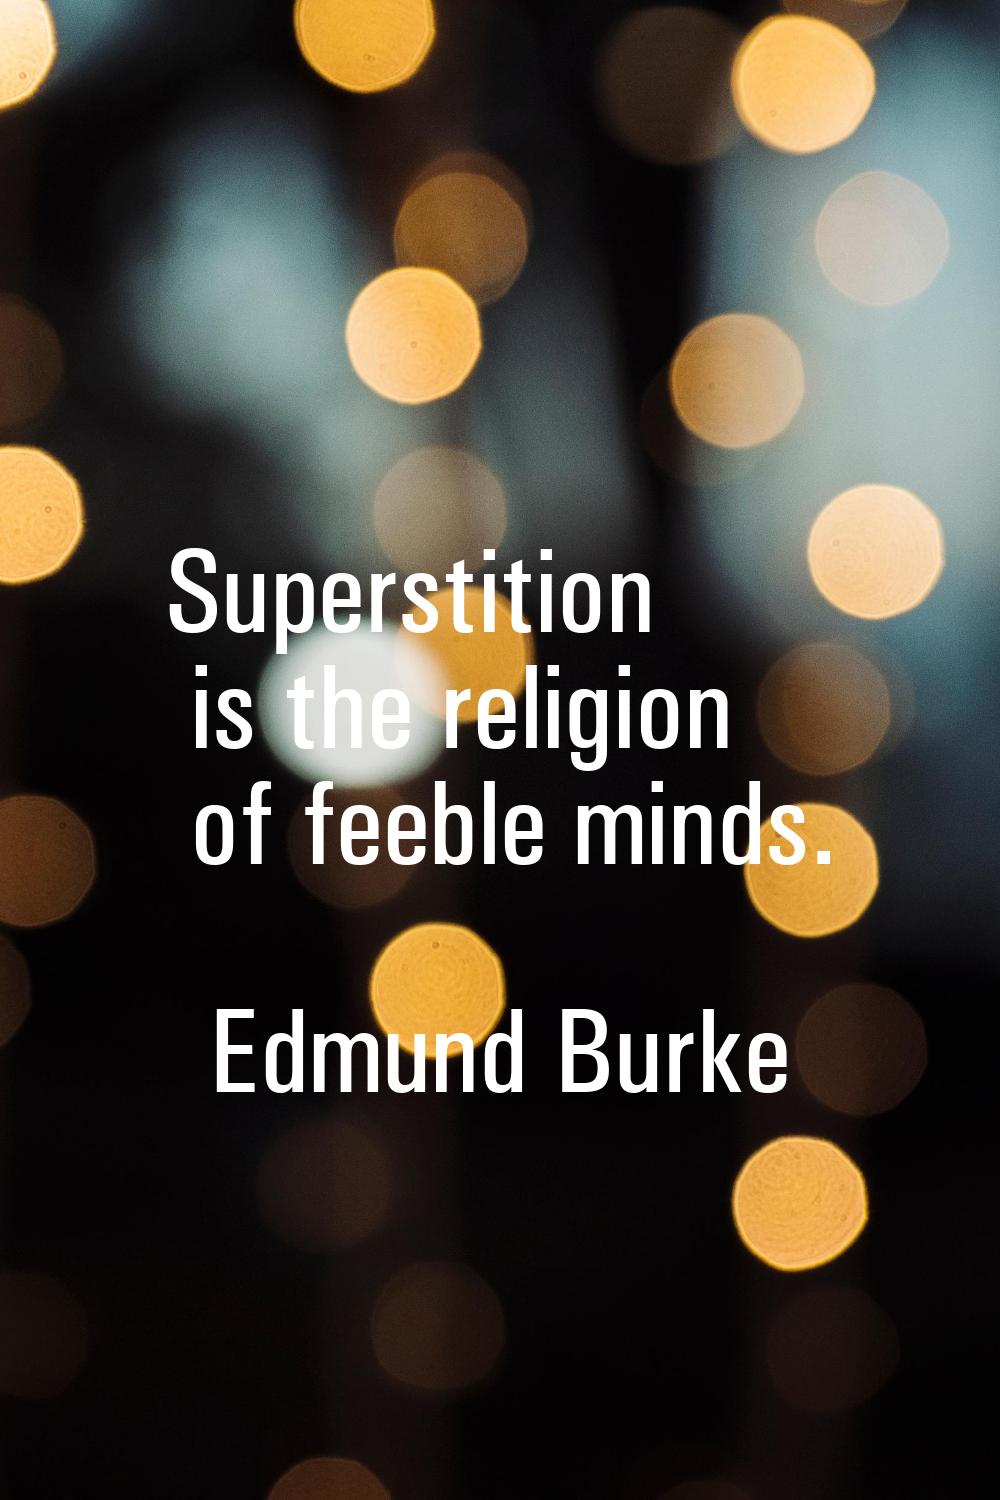 Superstition is the religion of feeble minds.